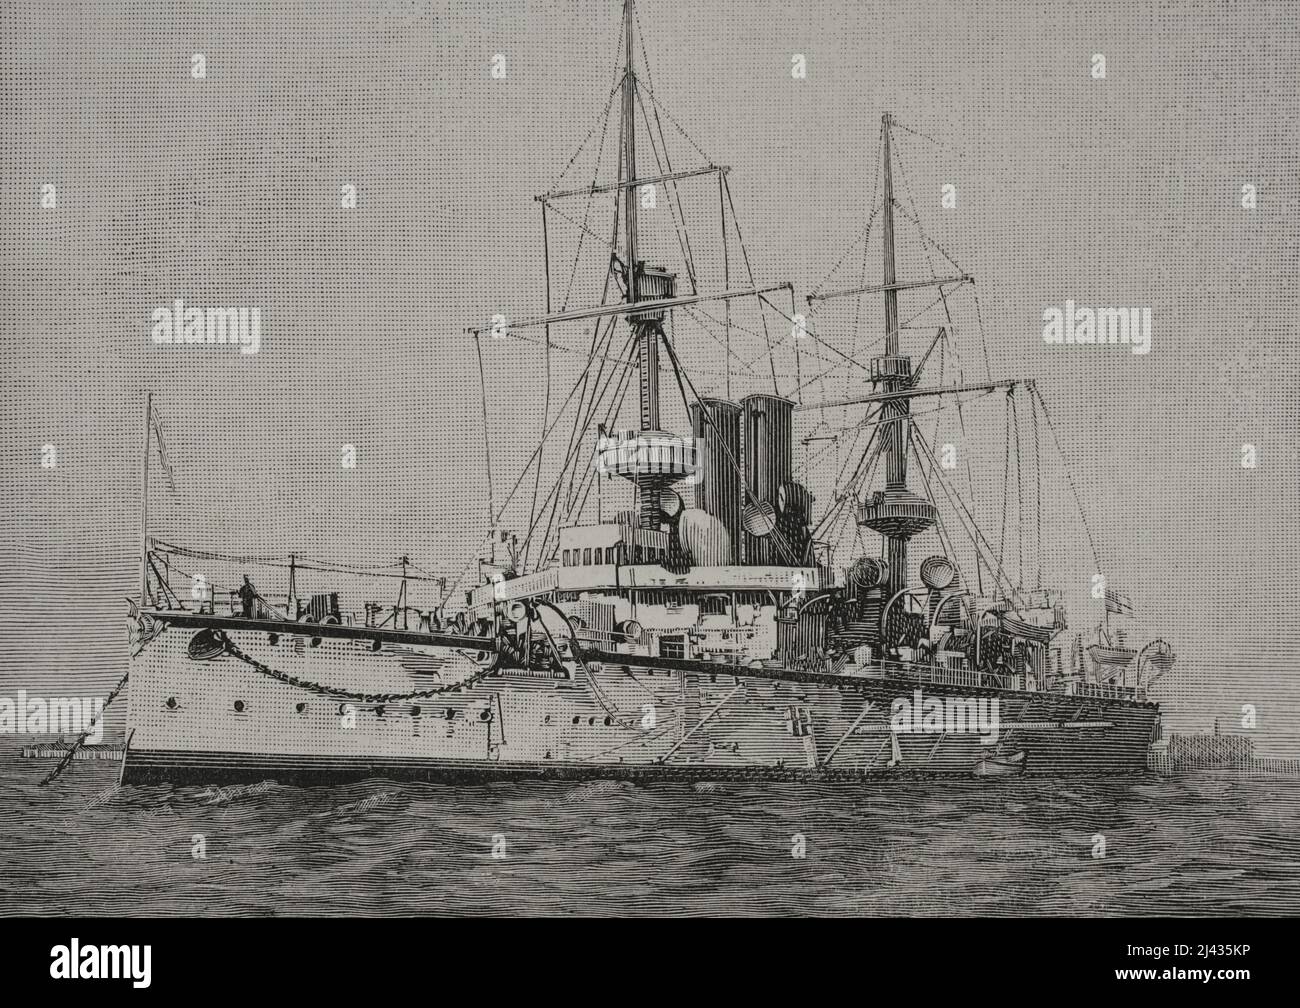 HMS Centurion (1892). Centurion-class battleship. It was built for the Royal Navy, assigned to the China Station as its flagship. Engraving by Sampietro. La Ilustración Española y Americana, 1898. Stock Photo